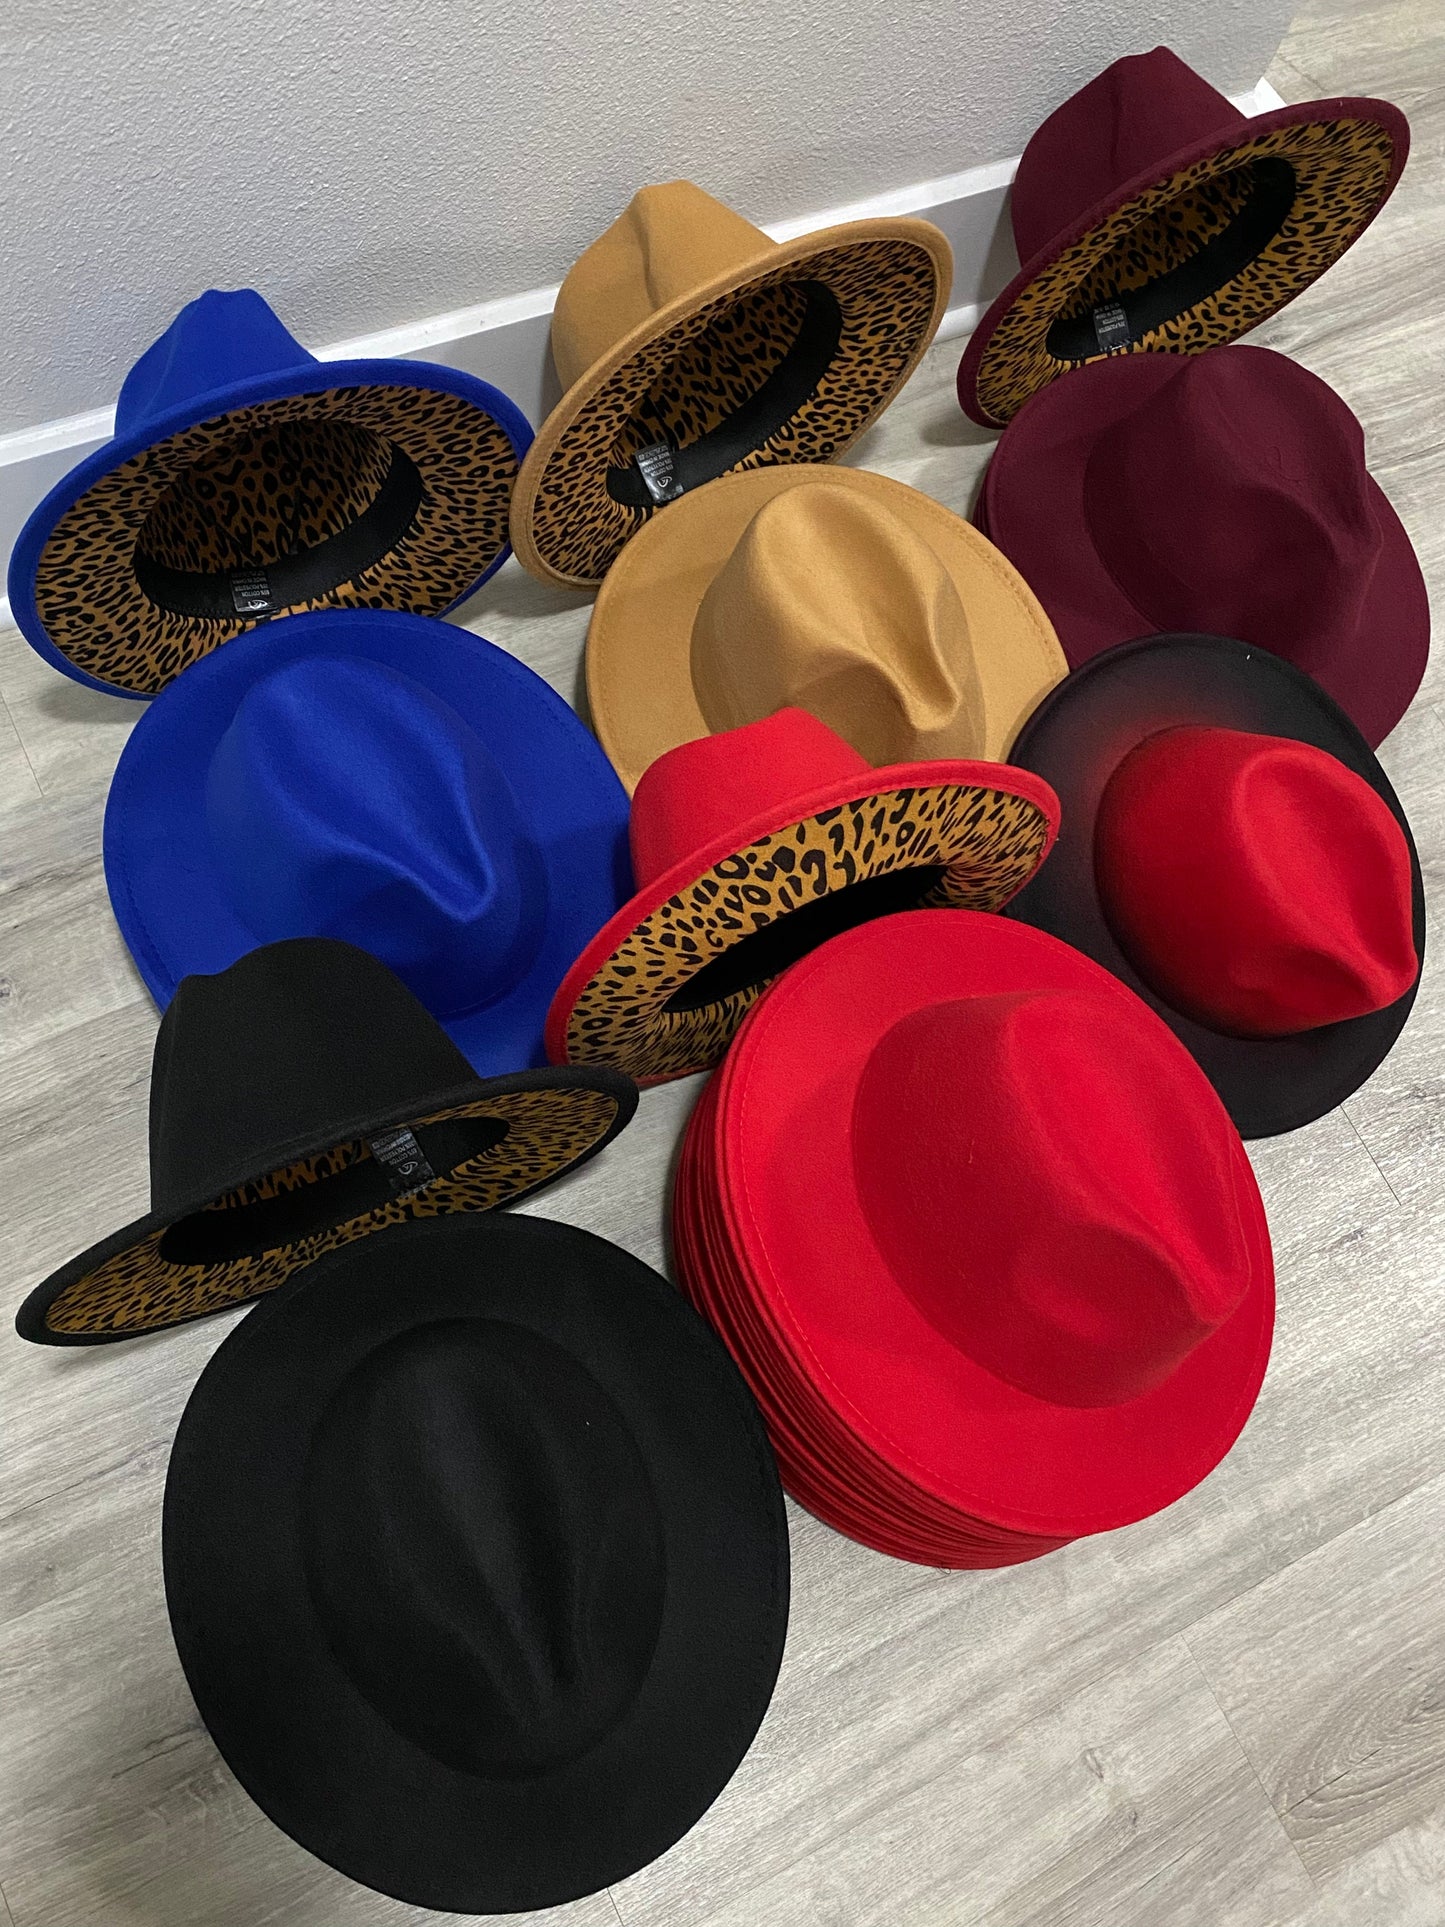 Mystery Fedora Hat Box 10 Pieces Final Sale